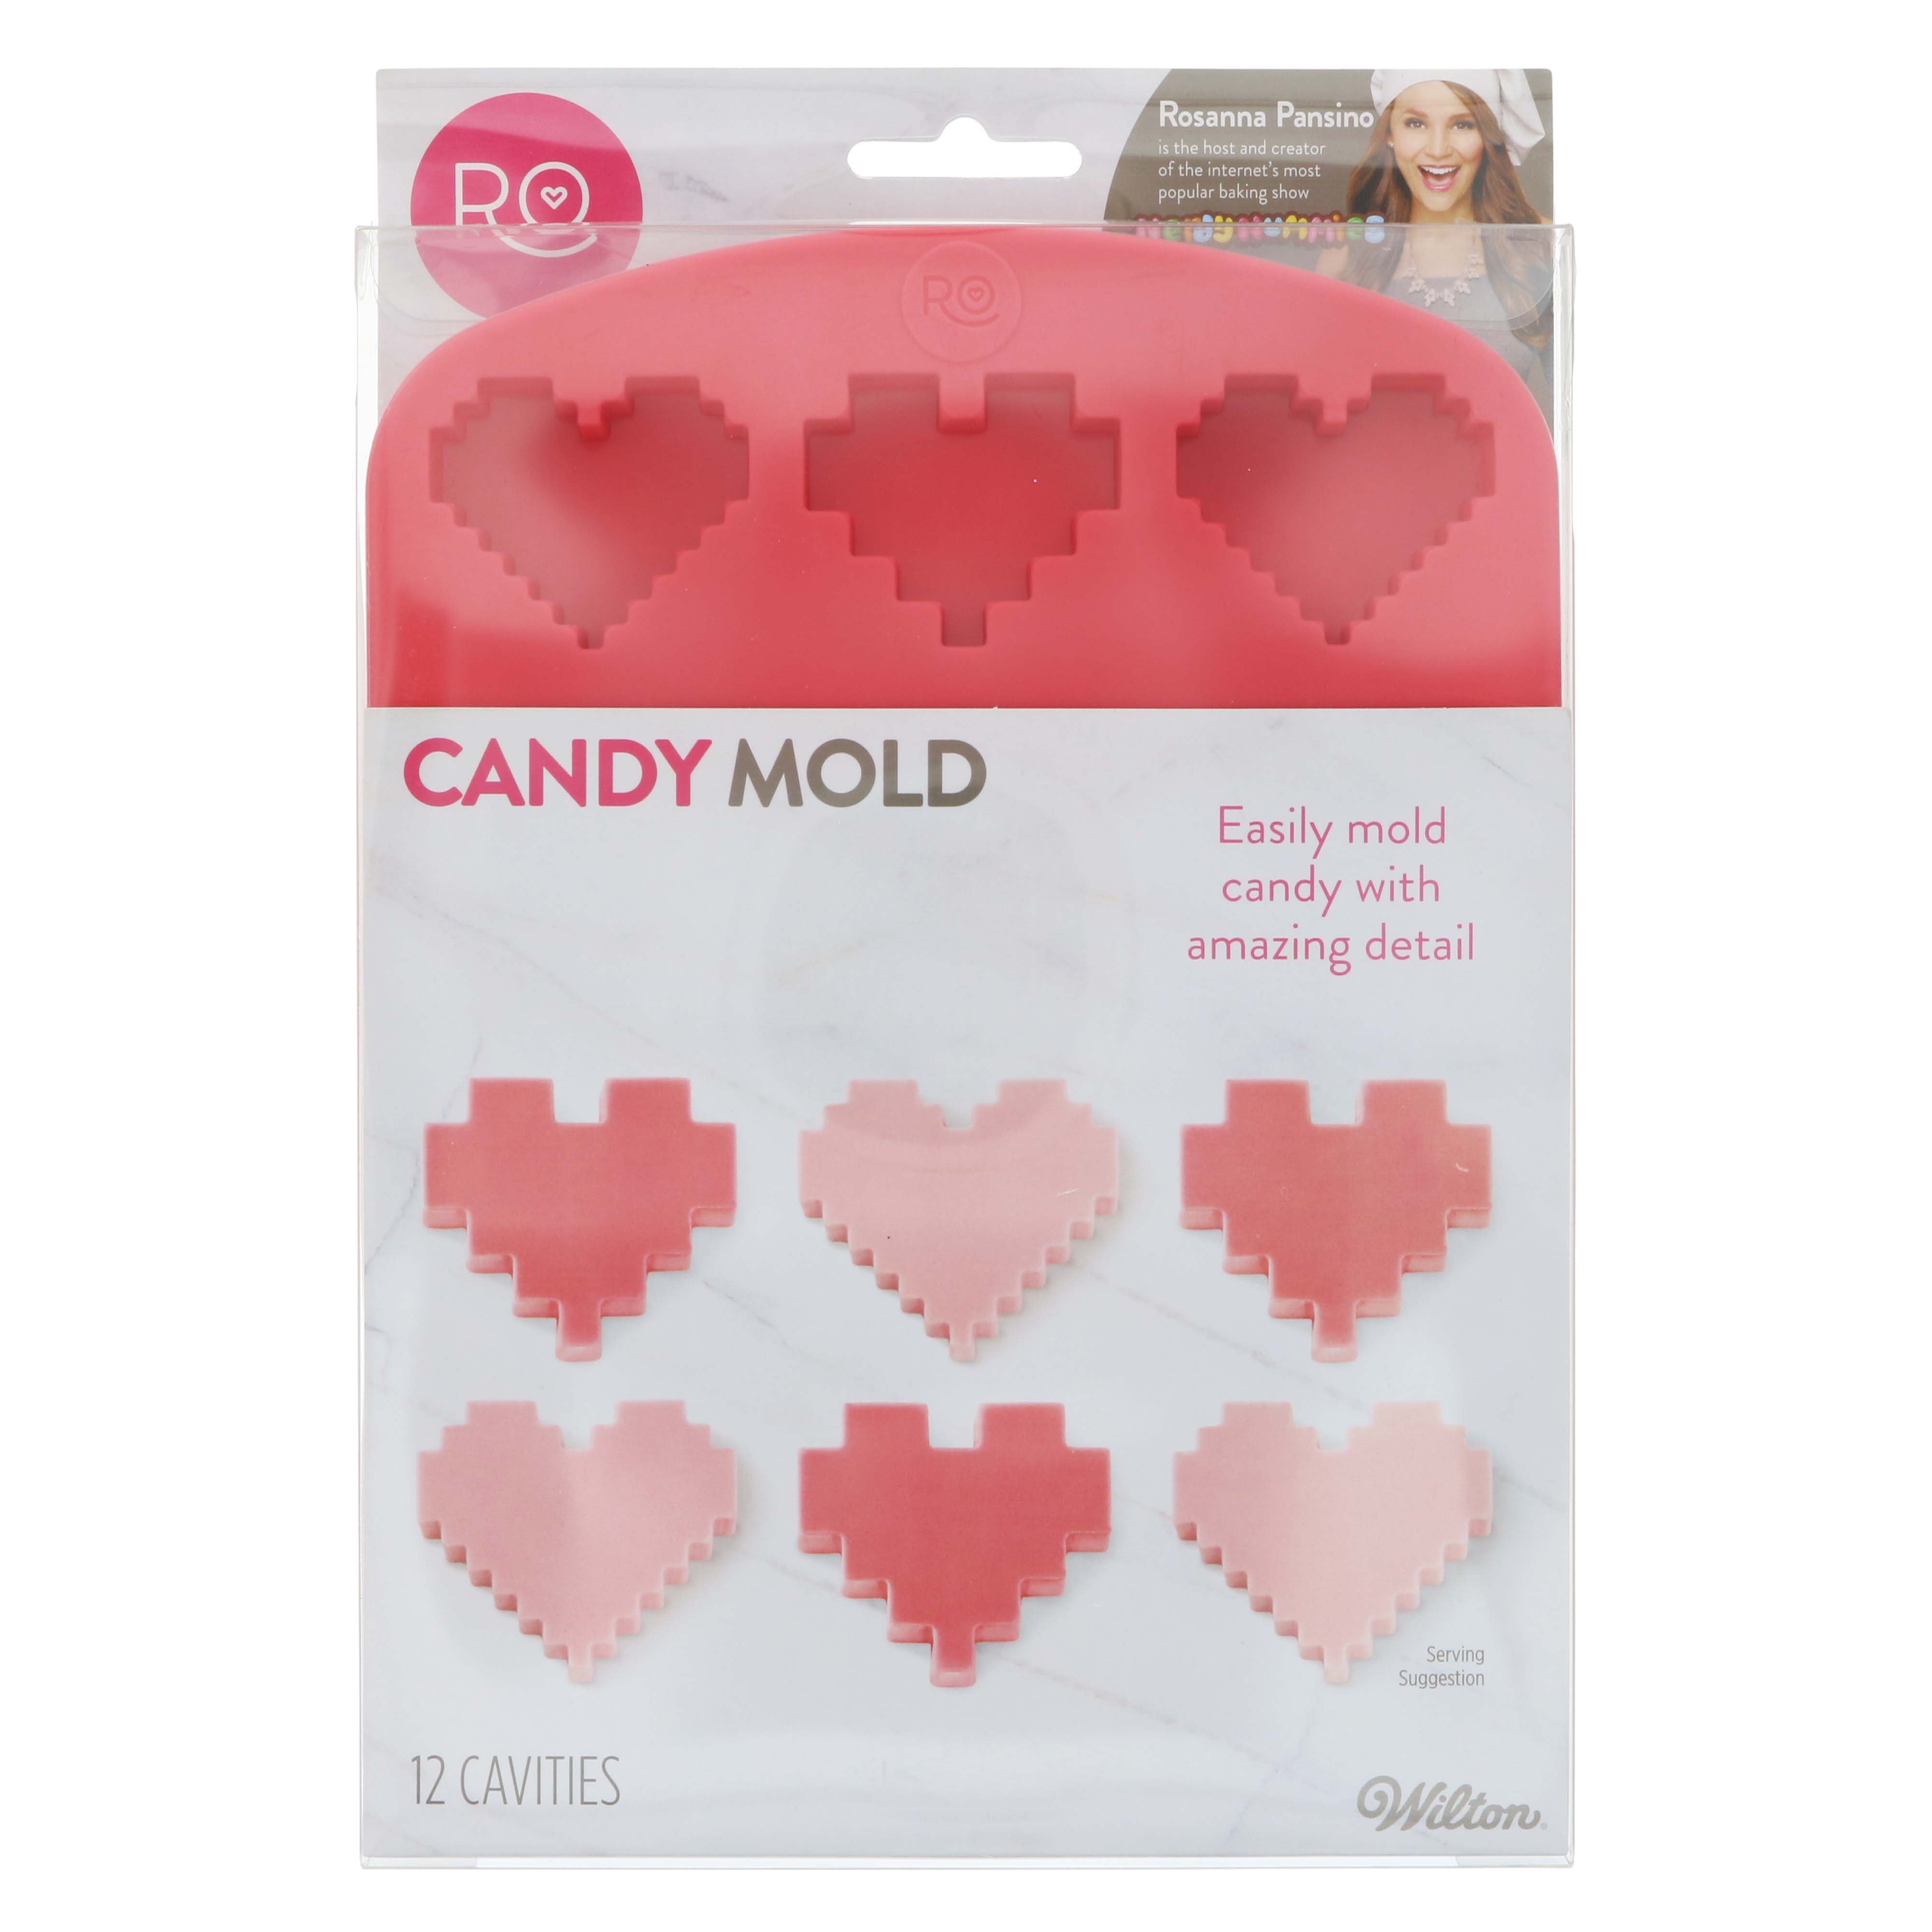 Kitchen & Table by H-E-B 6 Cavity Silicone Treat Mold - Hearts - Shop  Baking Tools at H-E-B